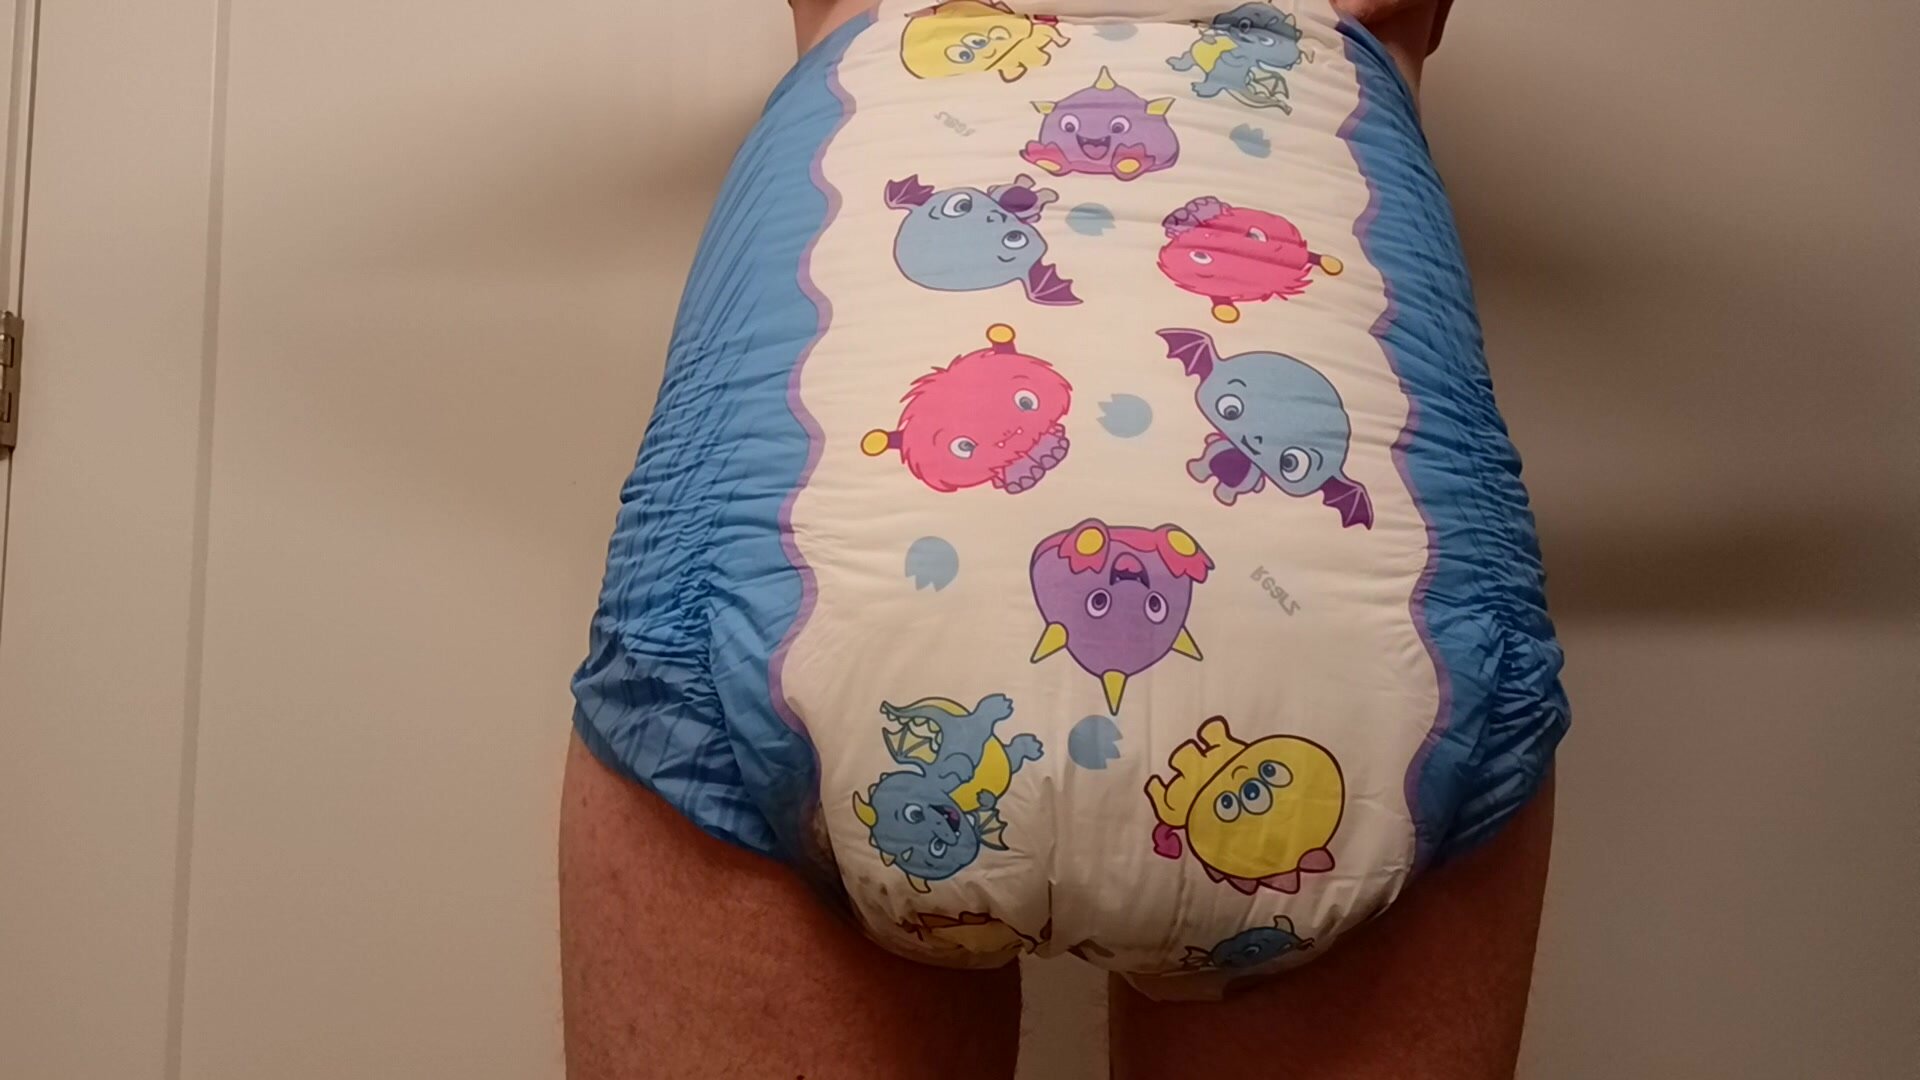 Explosive shit and huge piss in diaper